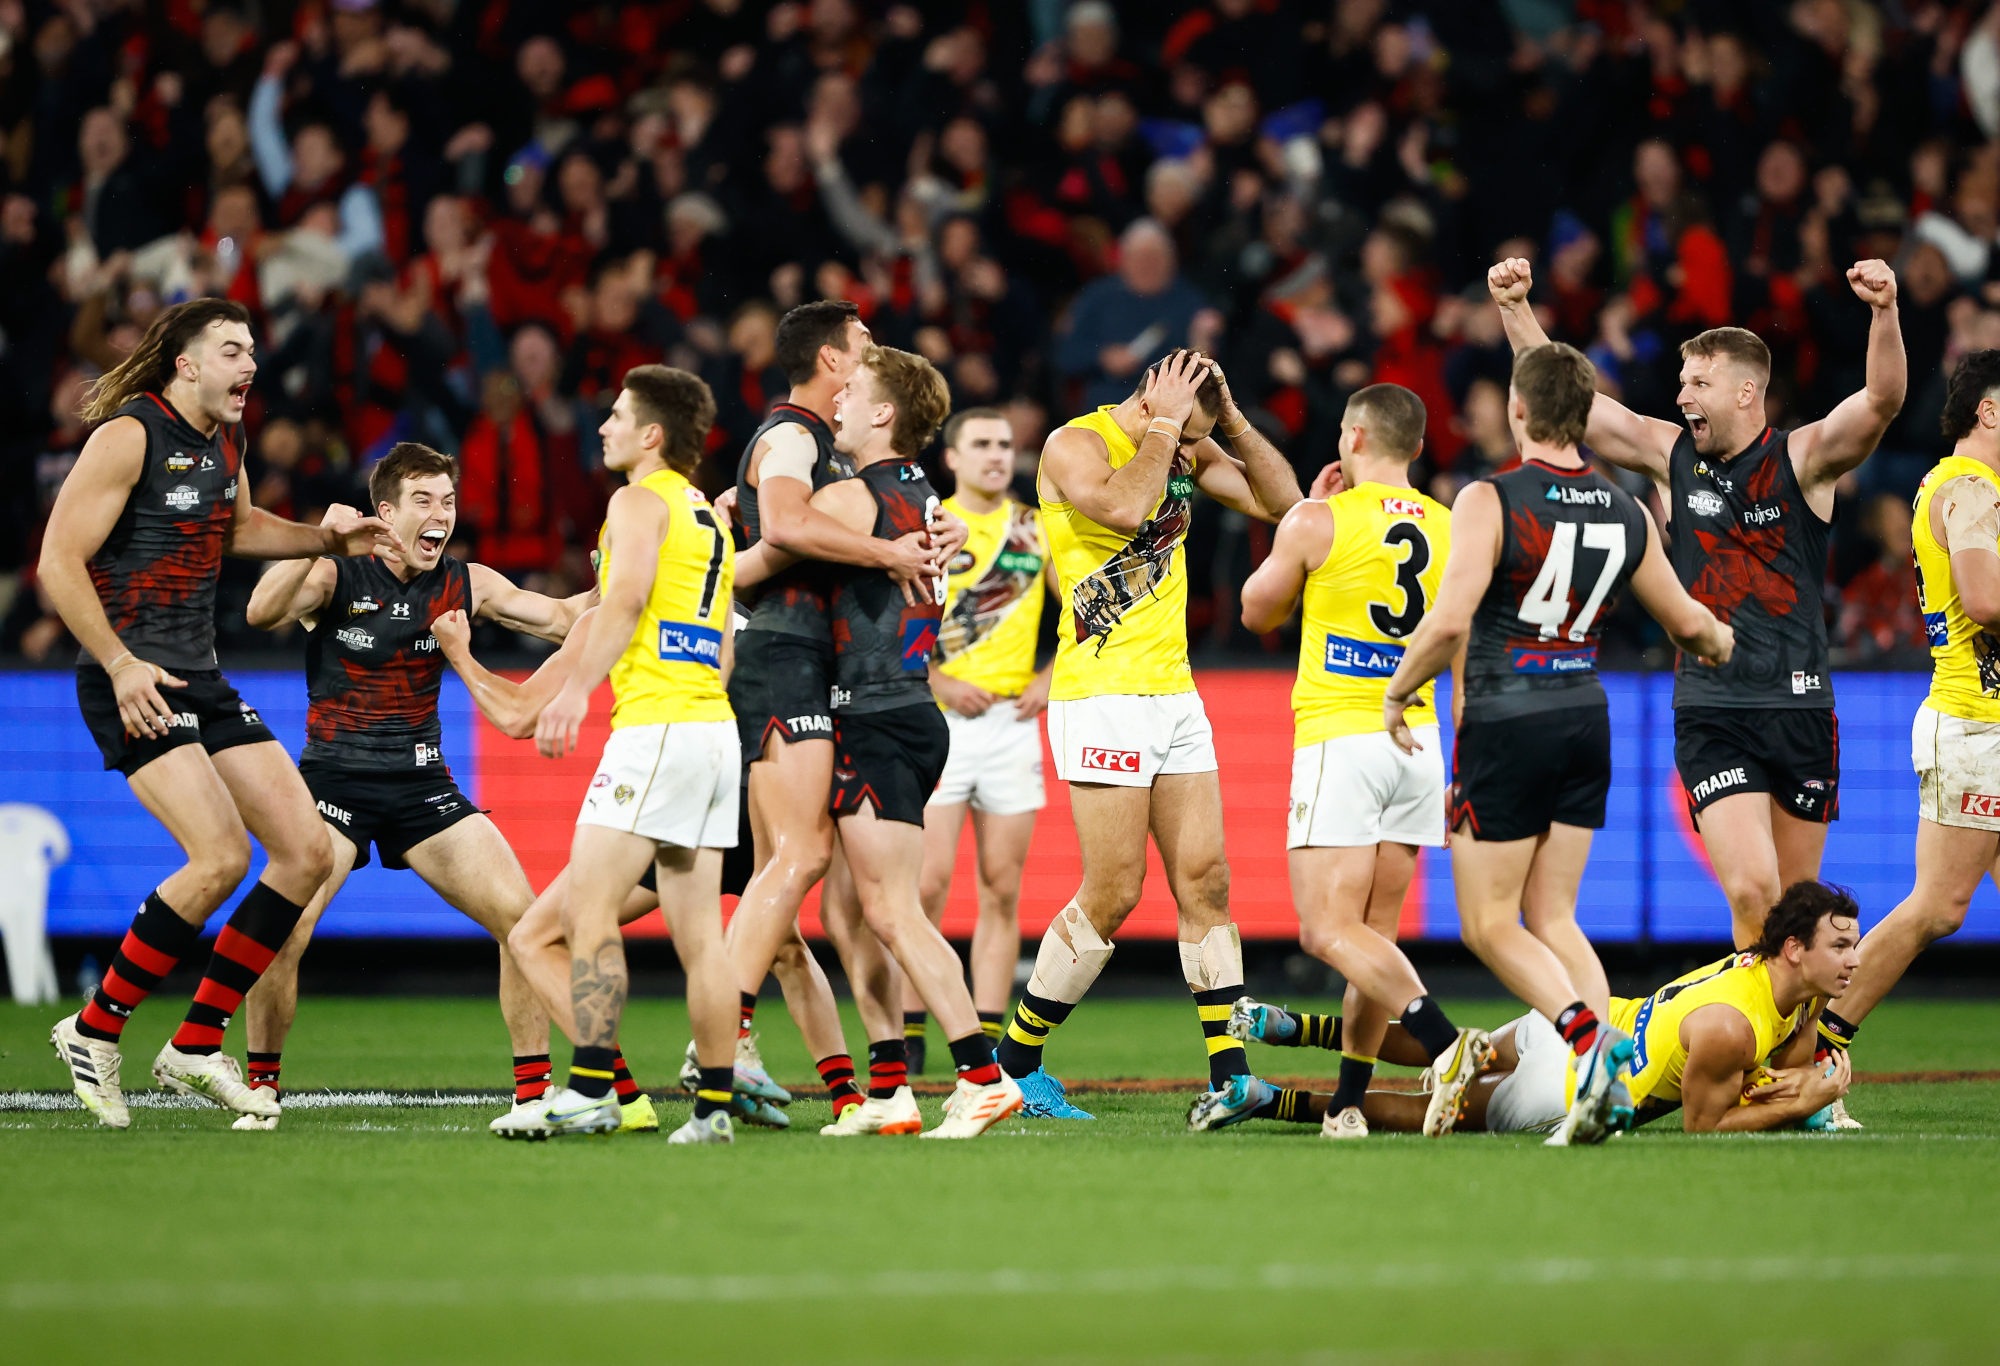 Essendon players celebrate their Dreamtime at the 'G victory over Richmond.